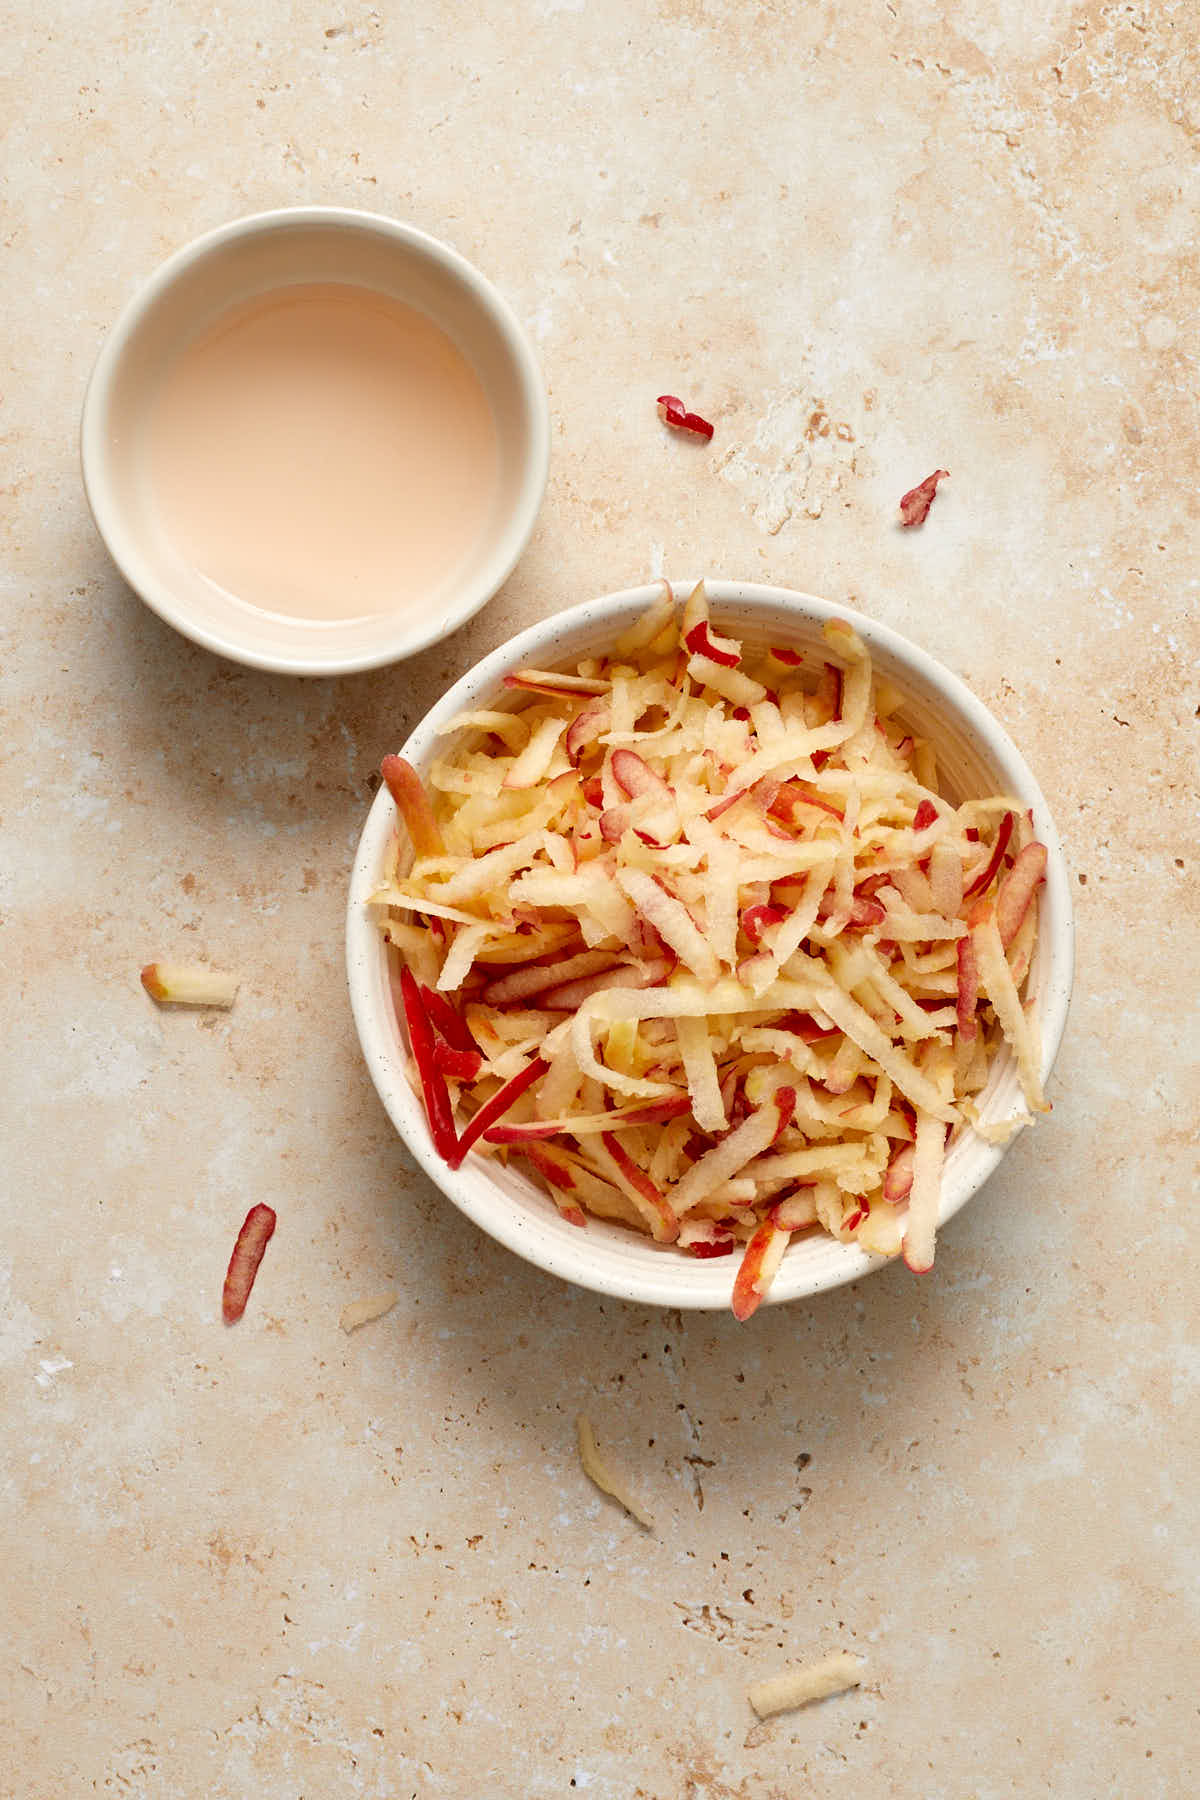 Grated apple in a small dish with apple juice squeezed out in a side dish.